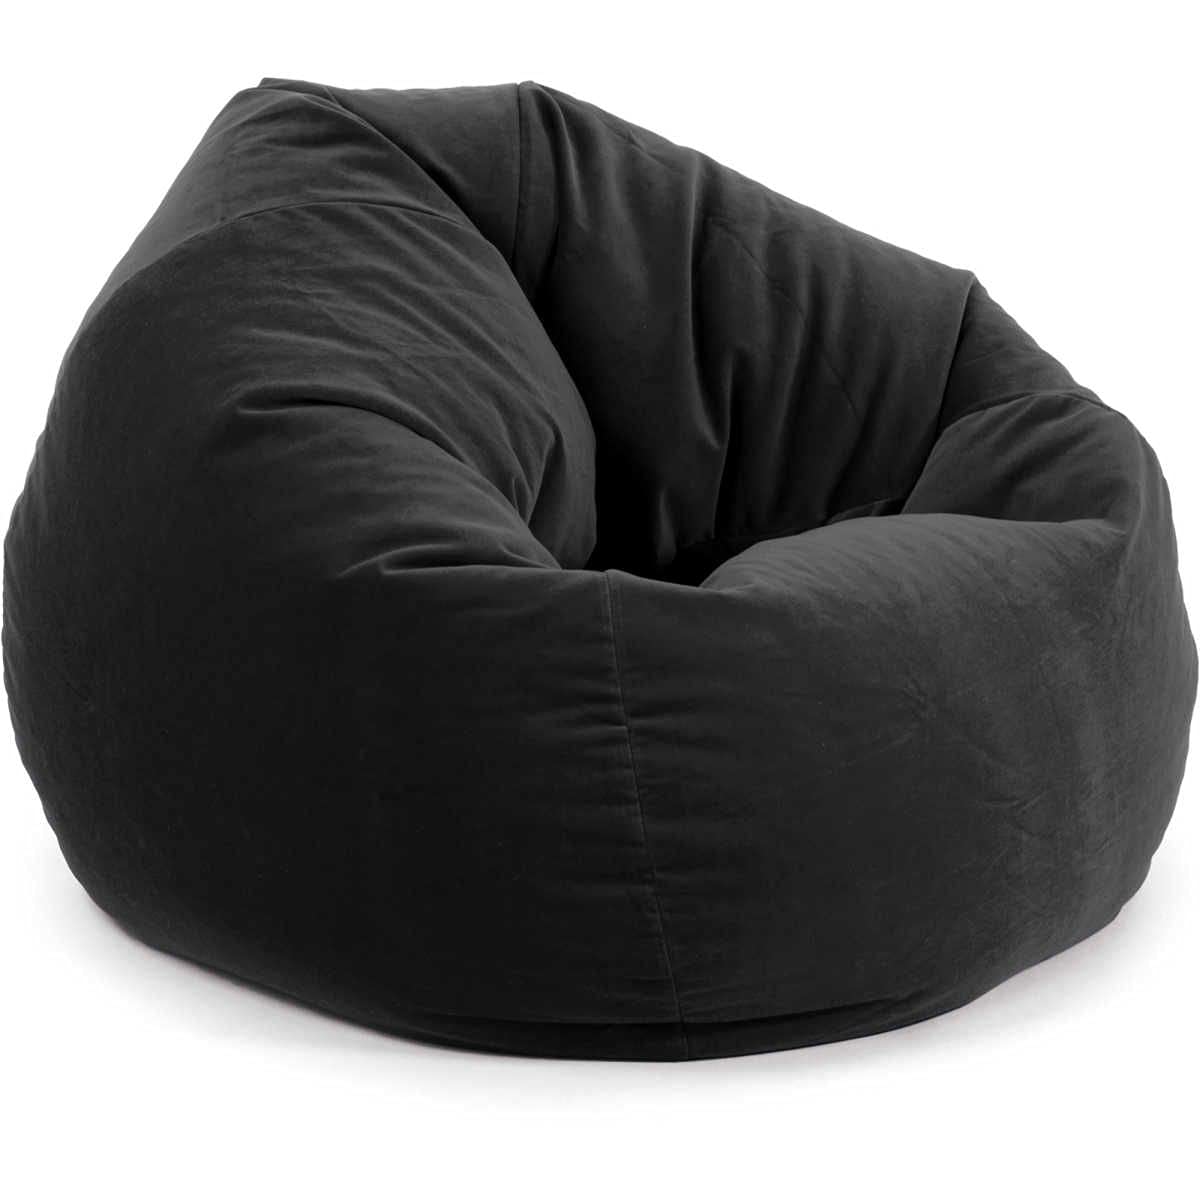 Bean Bag Soft and comfortable Lounger chair Living Room Furniture and Outdoor Furniture,Black